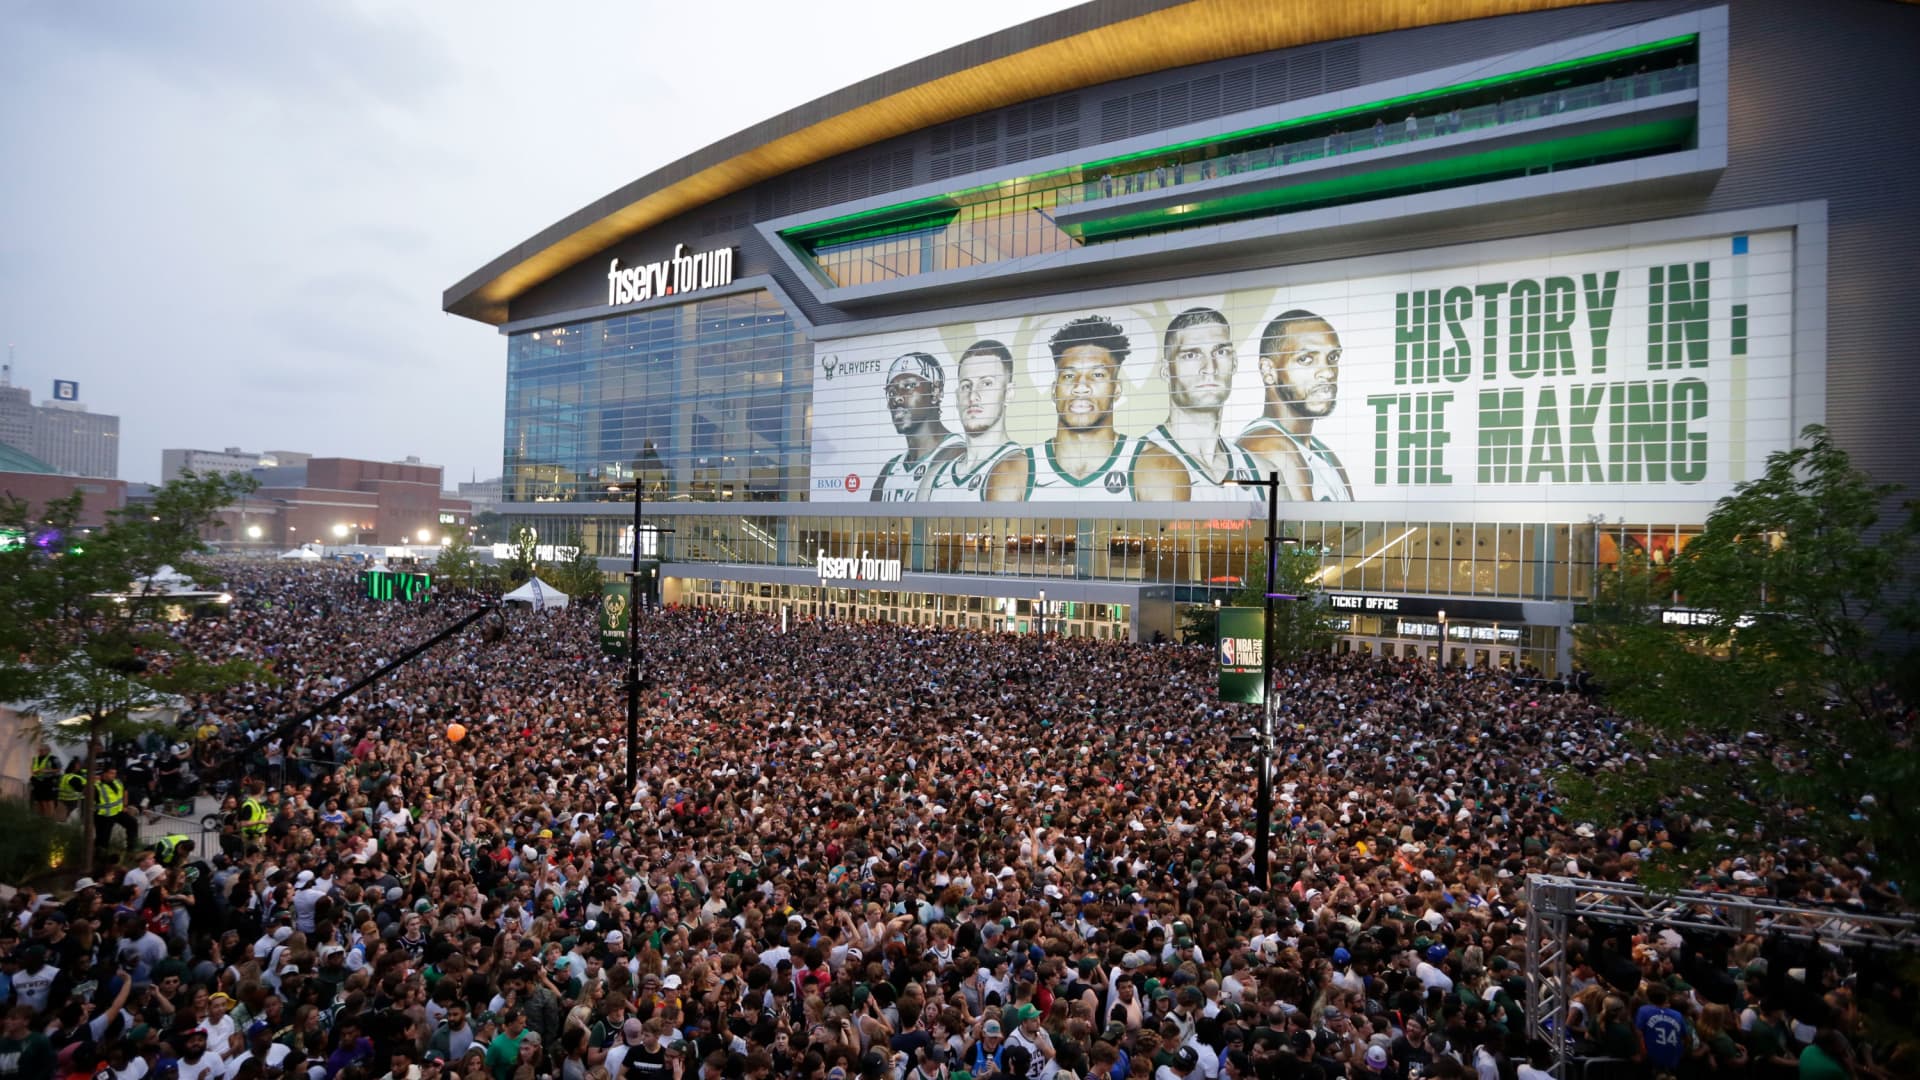 NBA’s Milwaukee Bucks are seeking $4 million annually for the Deer District property’s naming rights